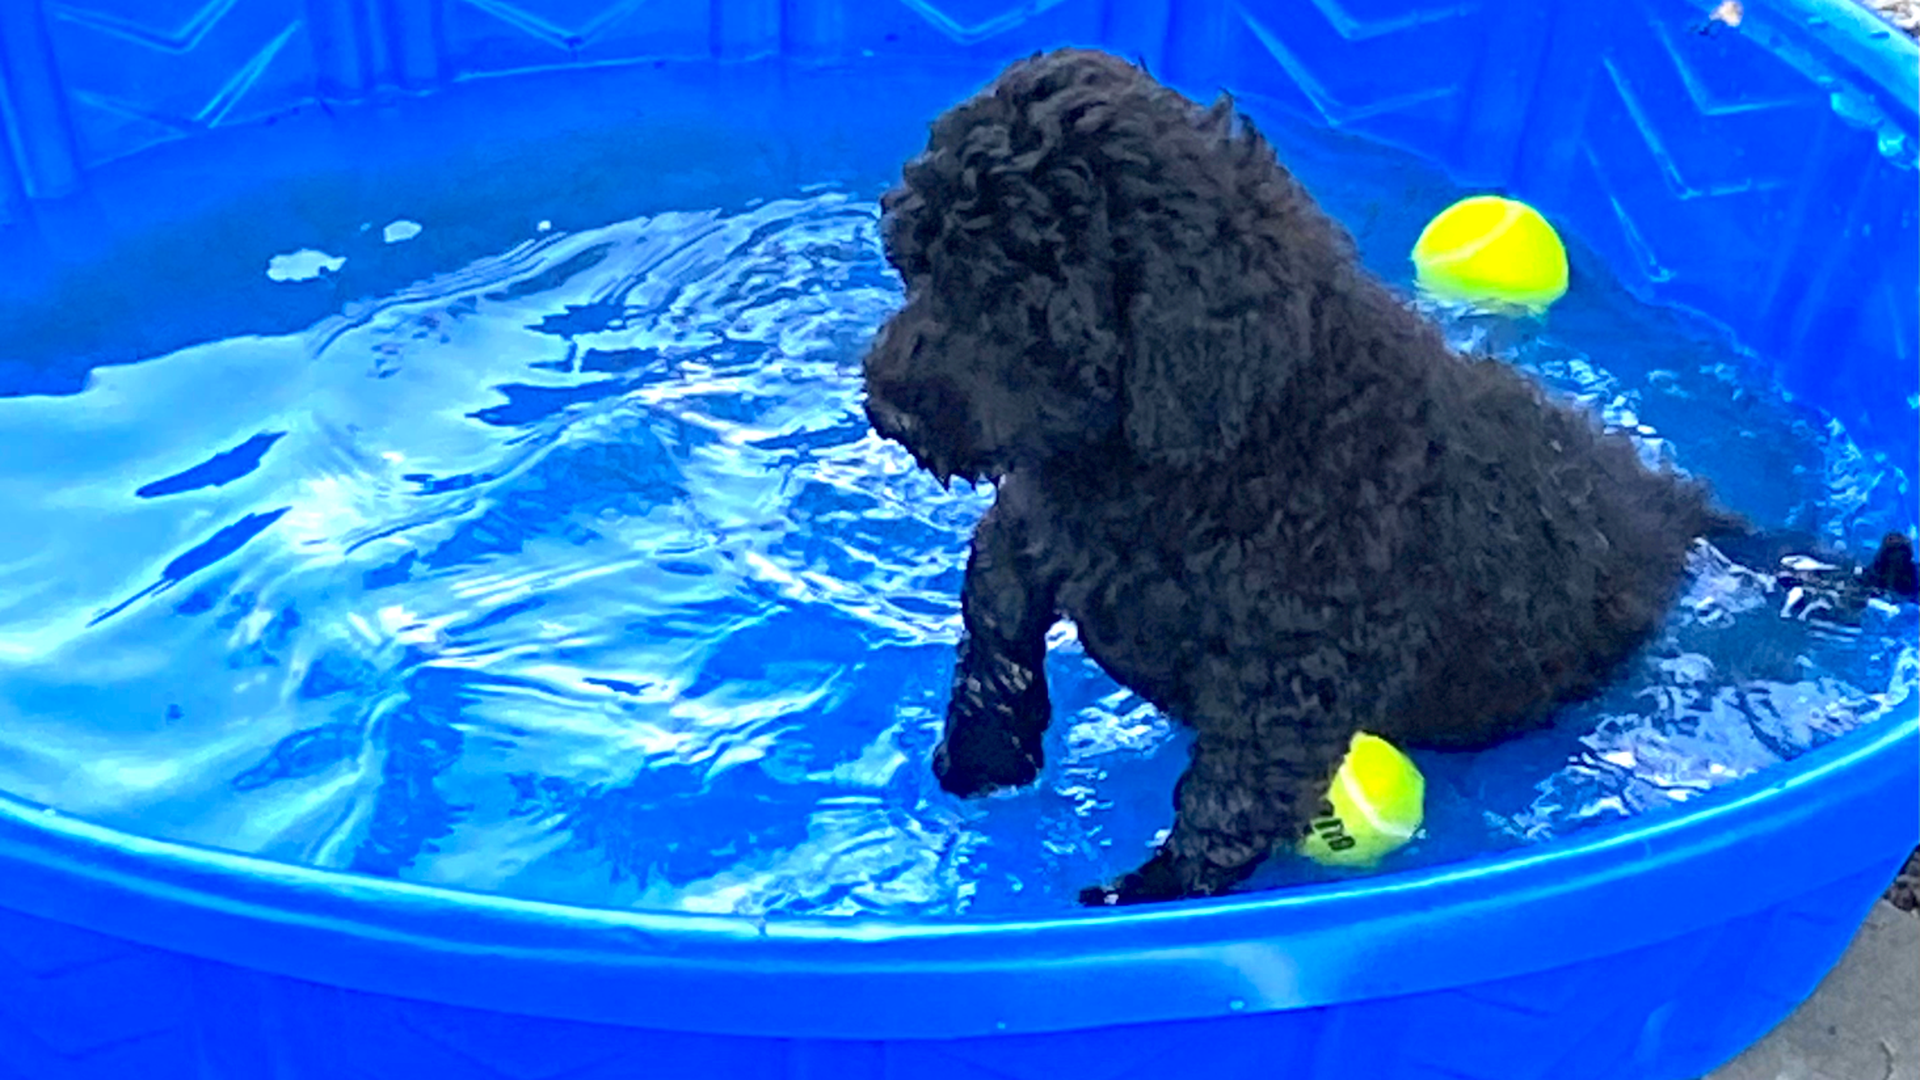 A portuguese water dog in a child-size pool.